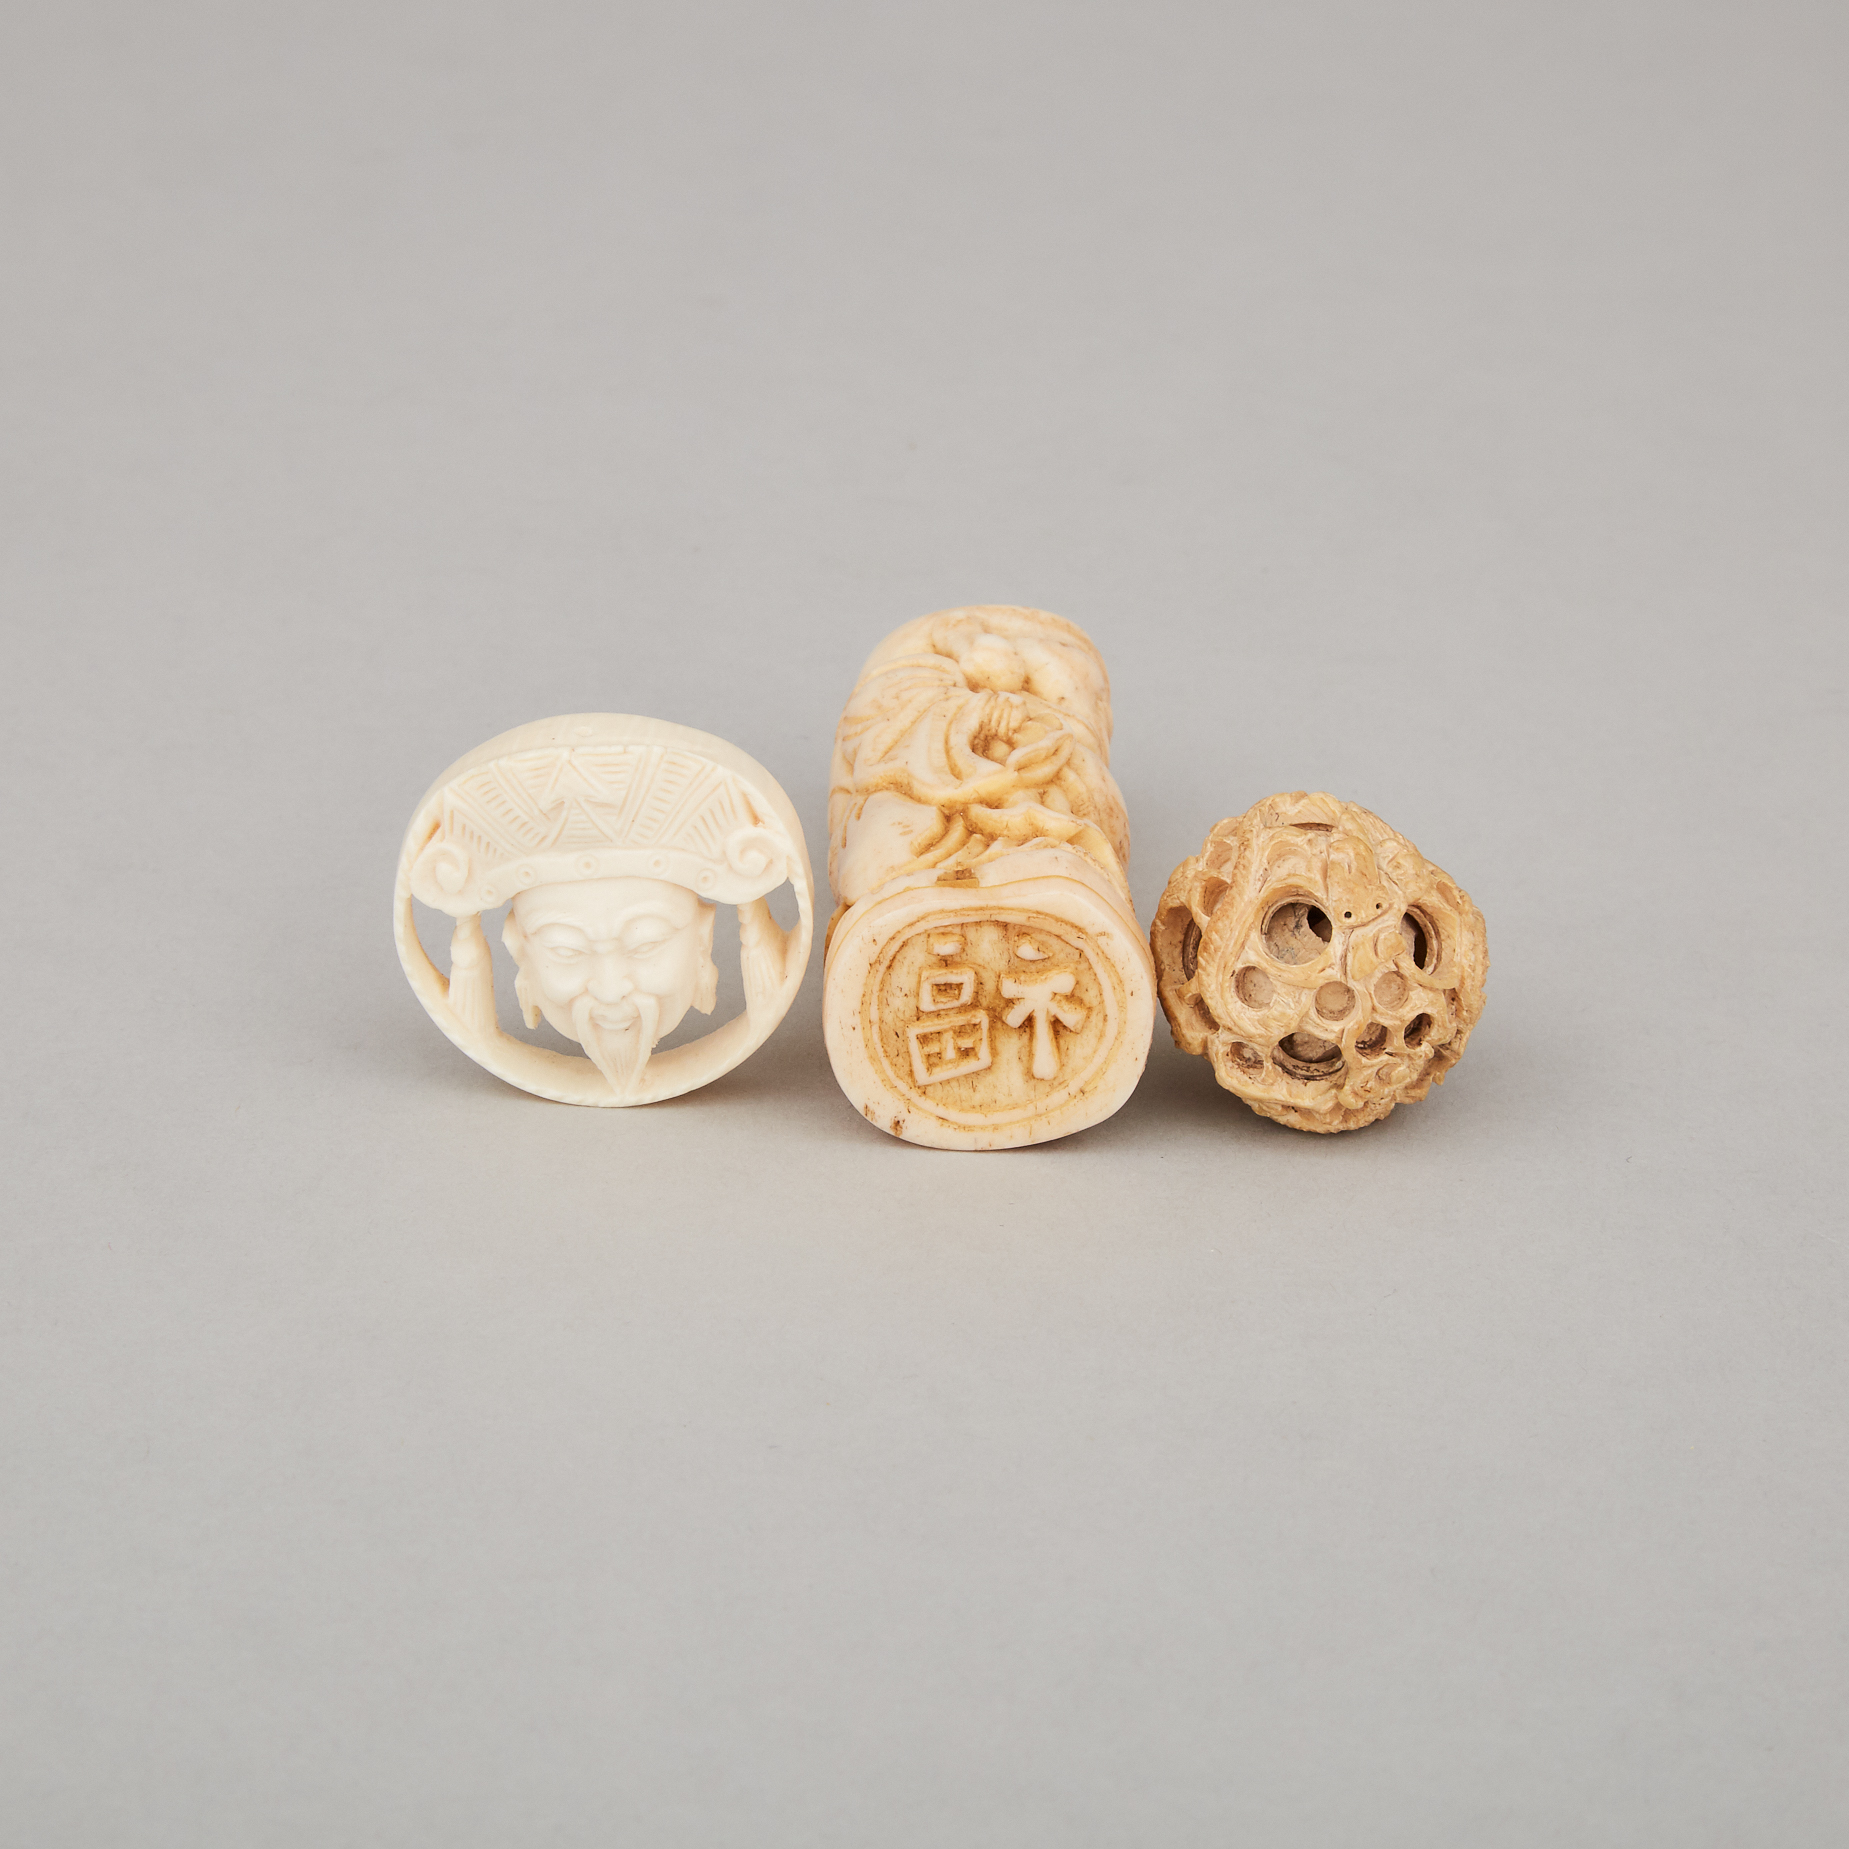 A Group of Three Ivory Carvings, Early 20th Century